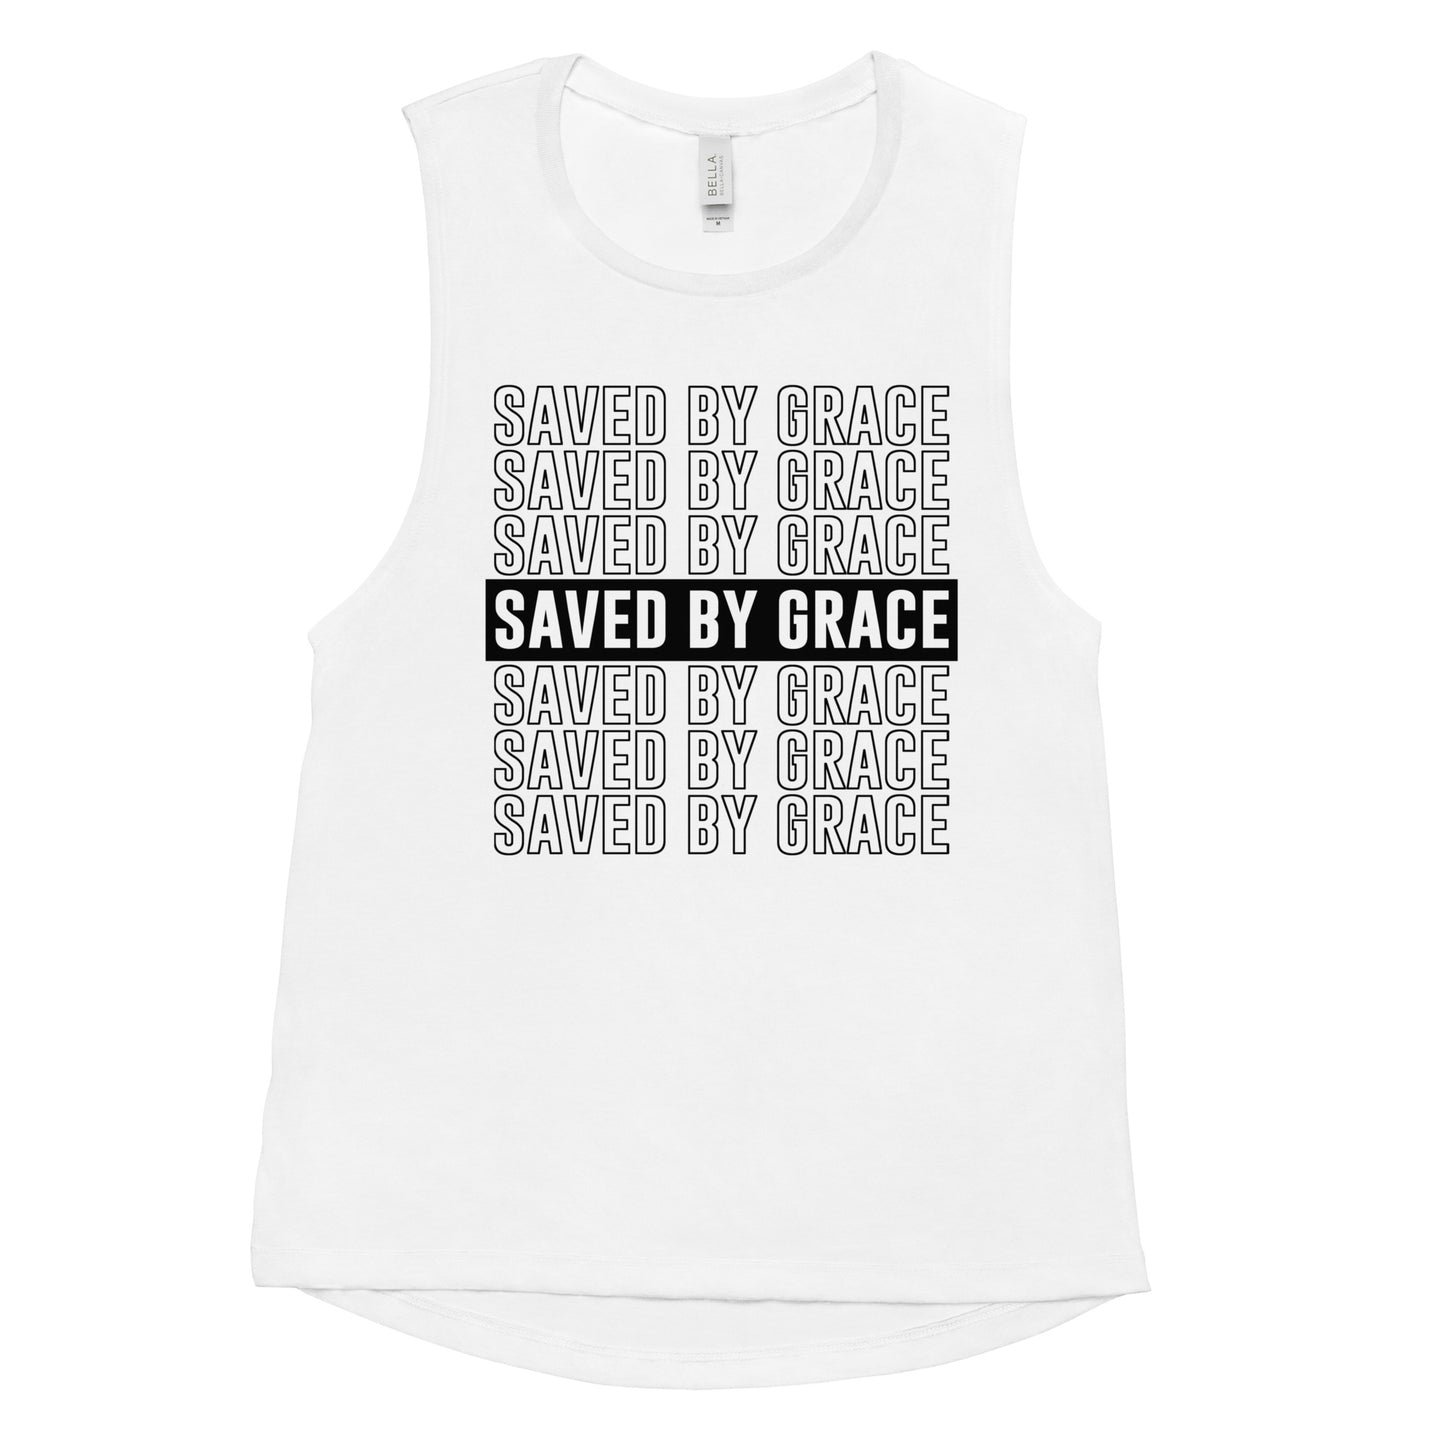 Saved by Grace Ladies’ Muscle Tank